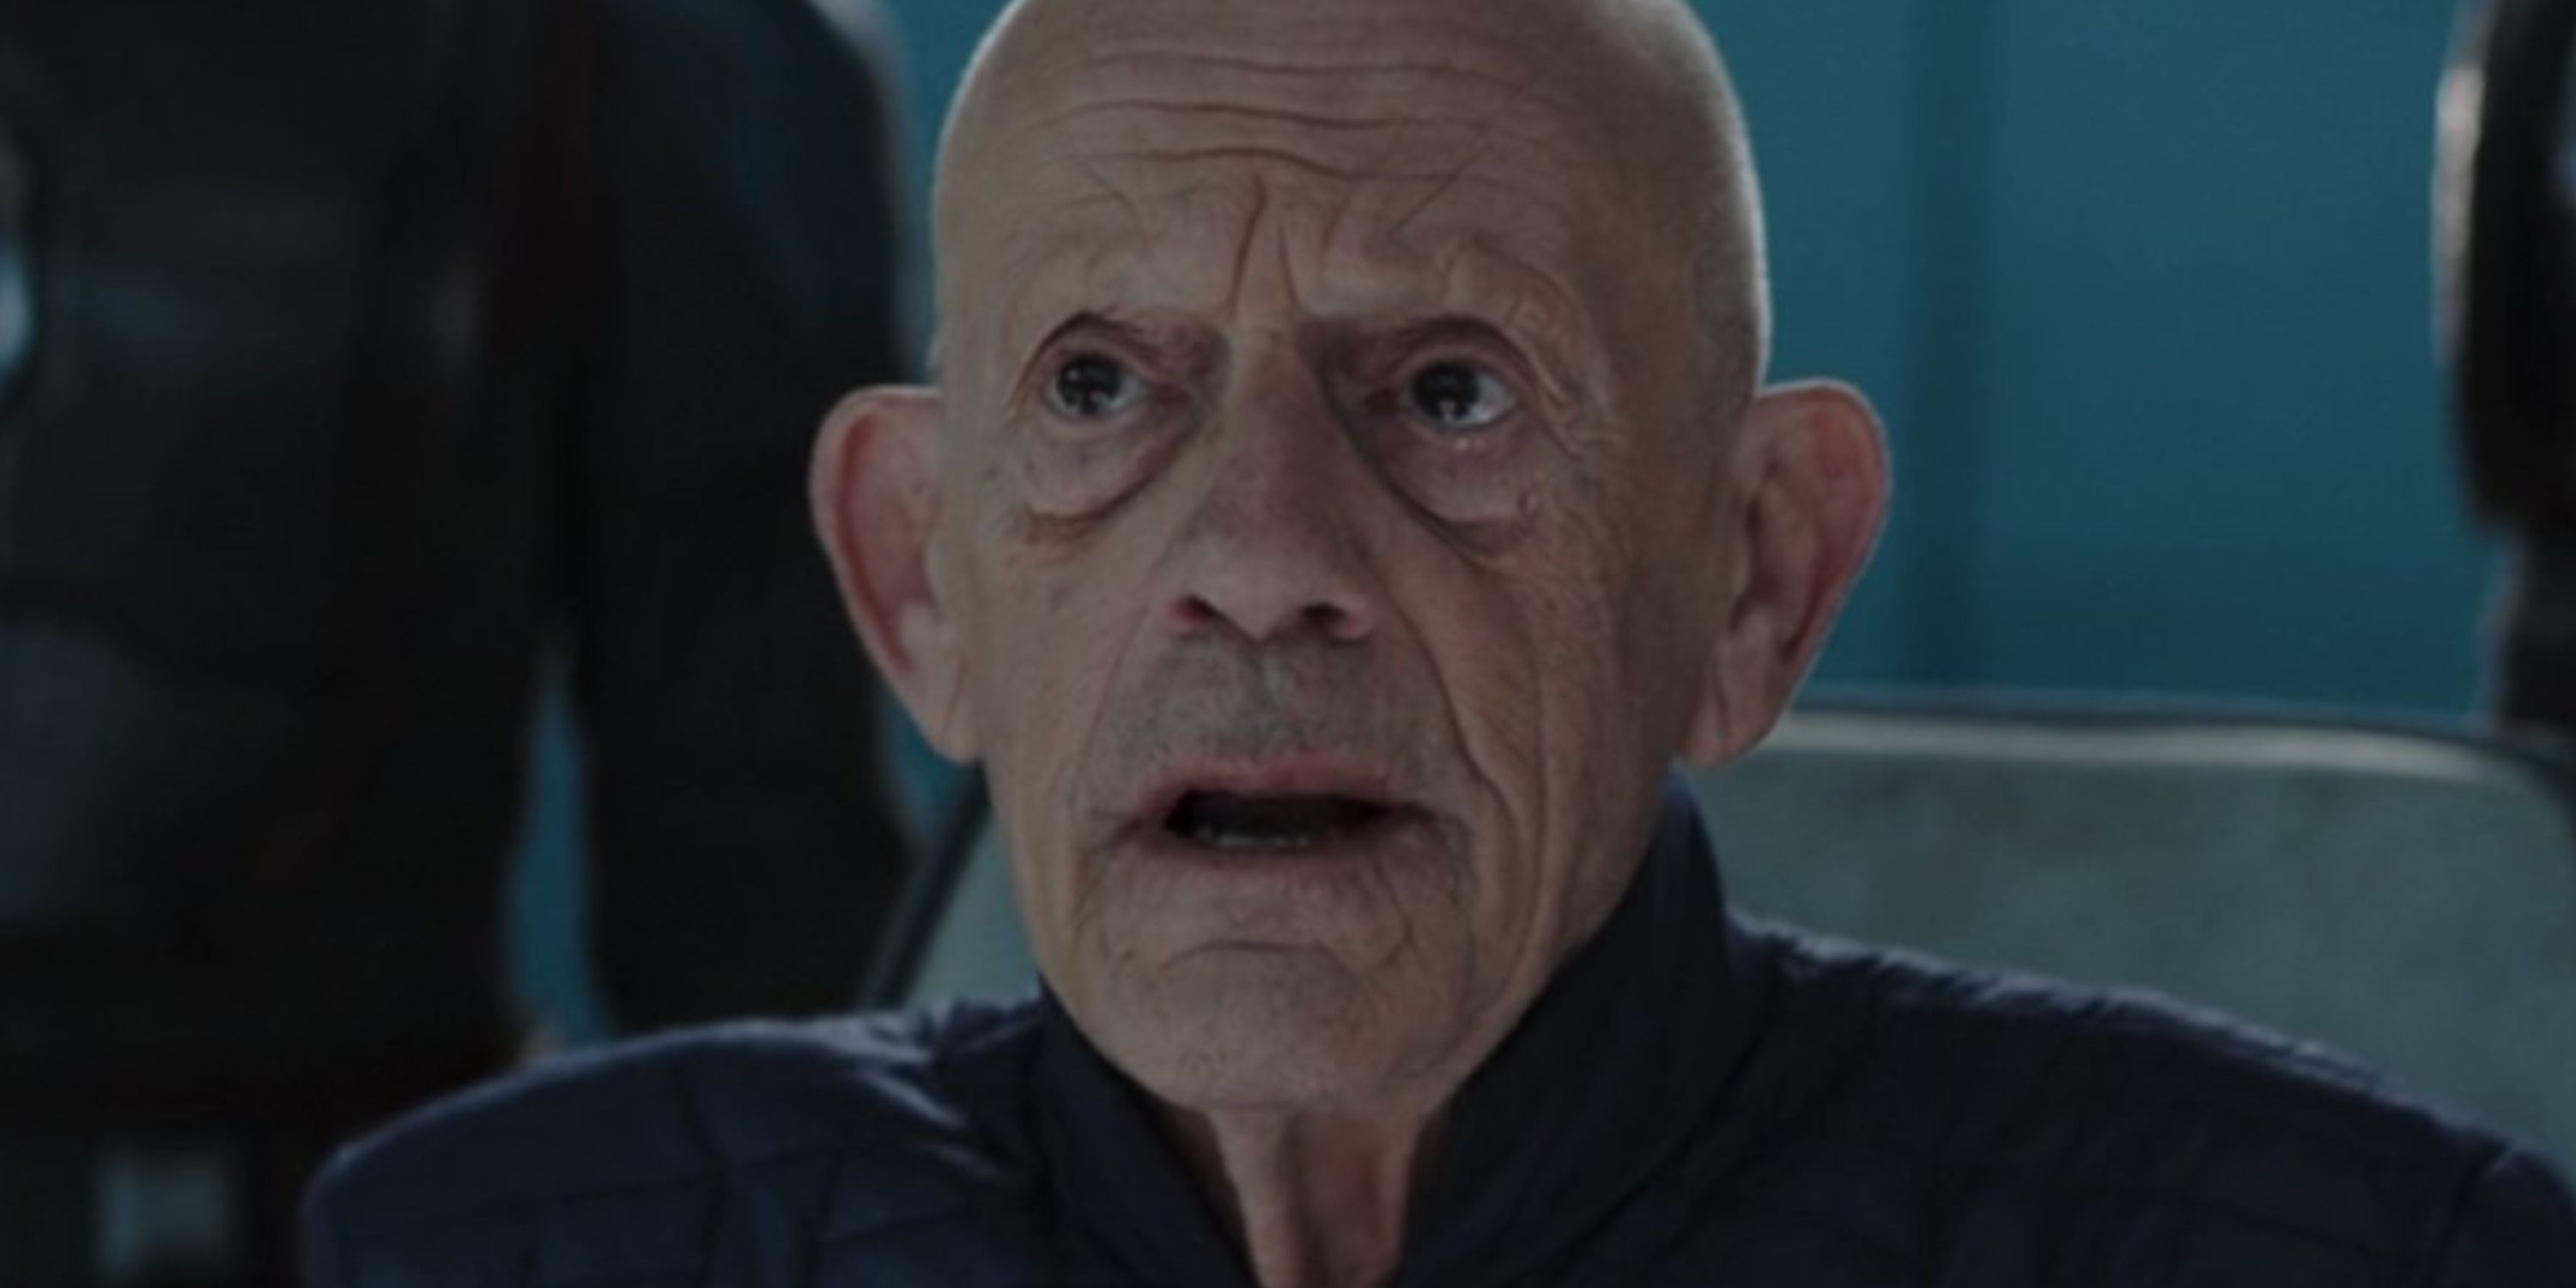 commissioner helgait played by christopher lloyd